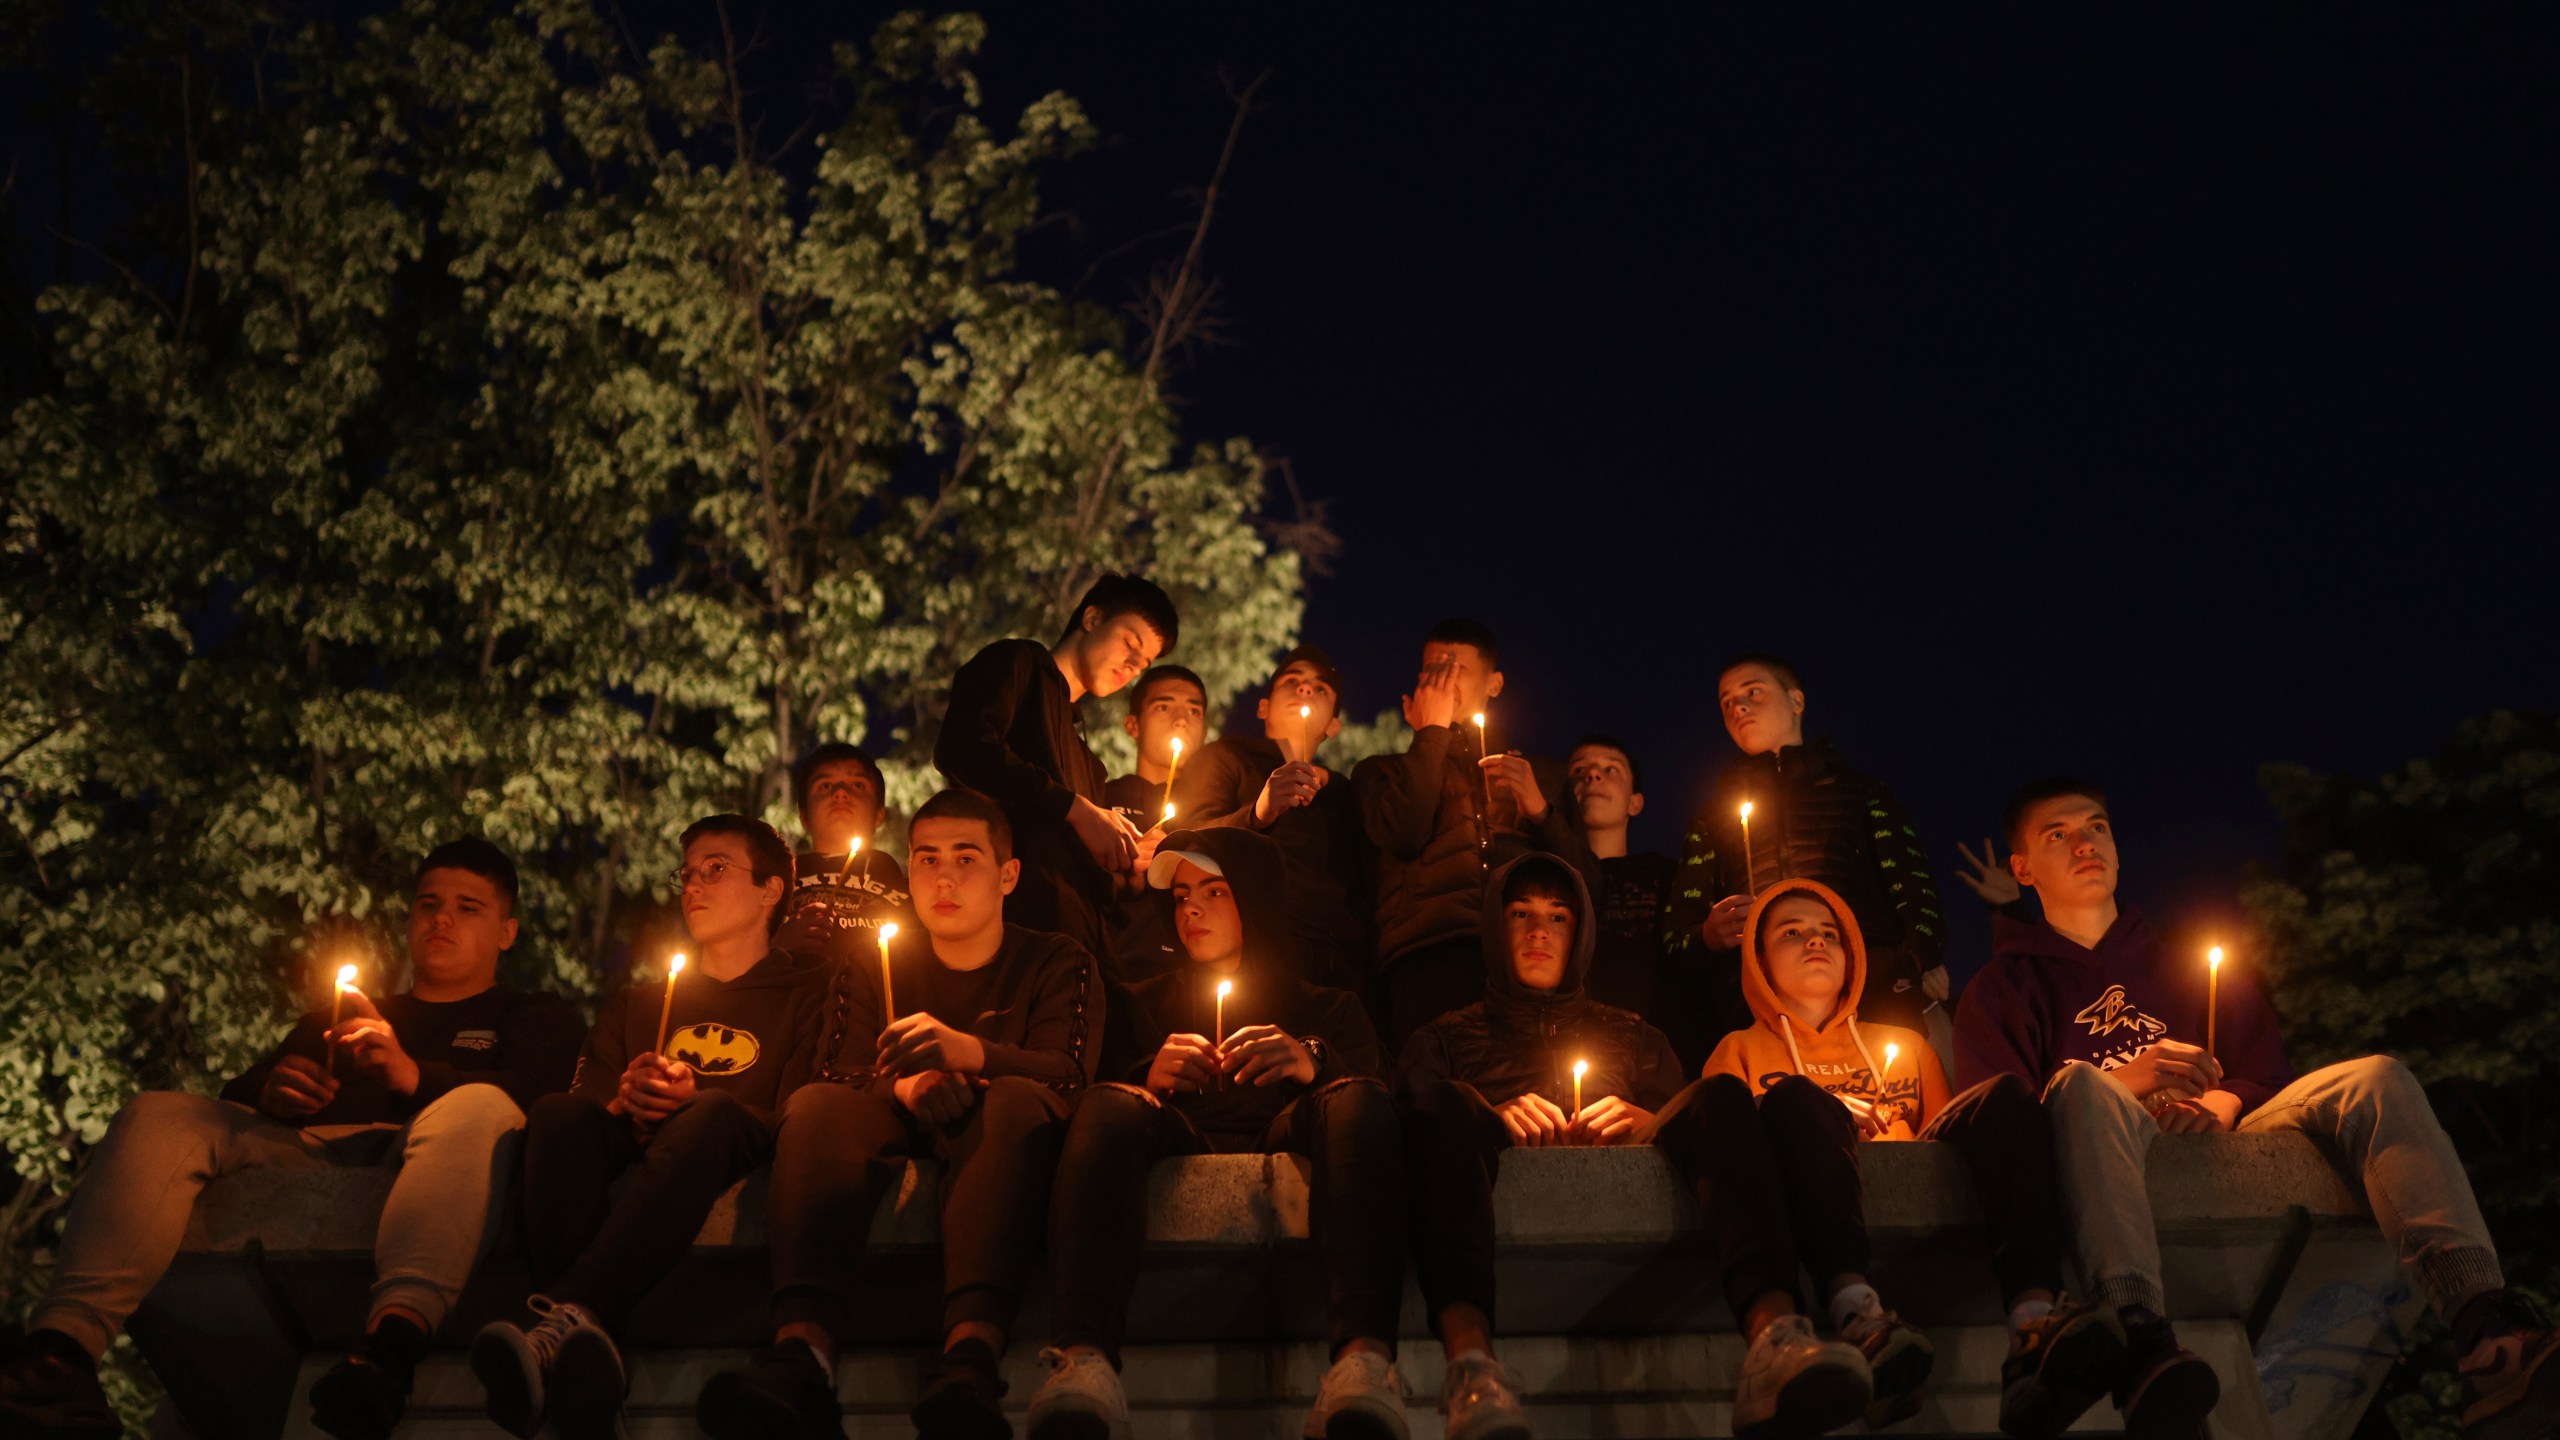 FILE - People hold candles for the victims near the Vladislav Ribnikar school in Belgrade, Serbia, Wednesday, May 3, 2023. A teenage boy opened fire at the school on the morning of May 3, 2023. Eight children and a school guard died, and seven people were wounded. One of the wounded, a child, died from injuries later. A total of 10 people were killed. (AP Photo/Armin Durgut, File)